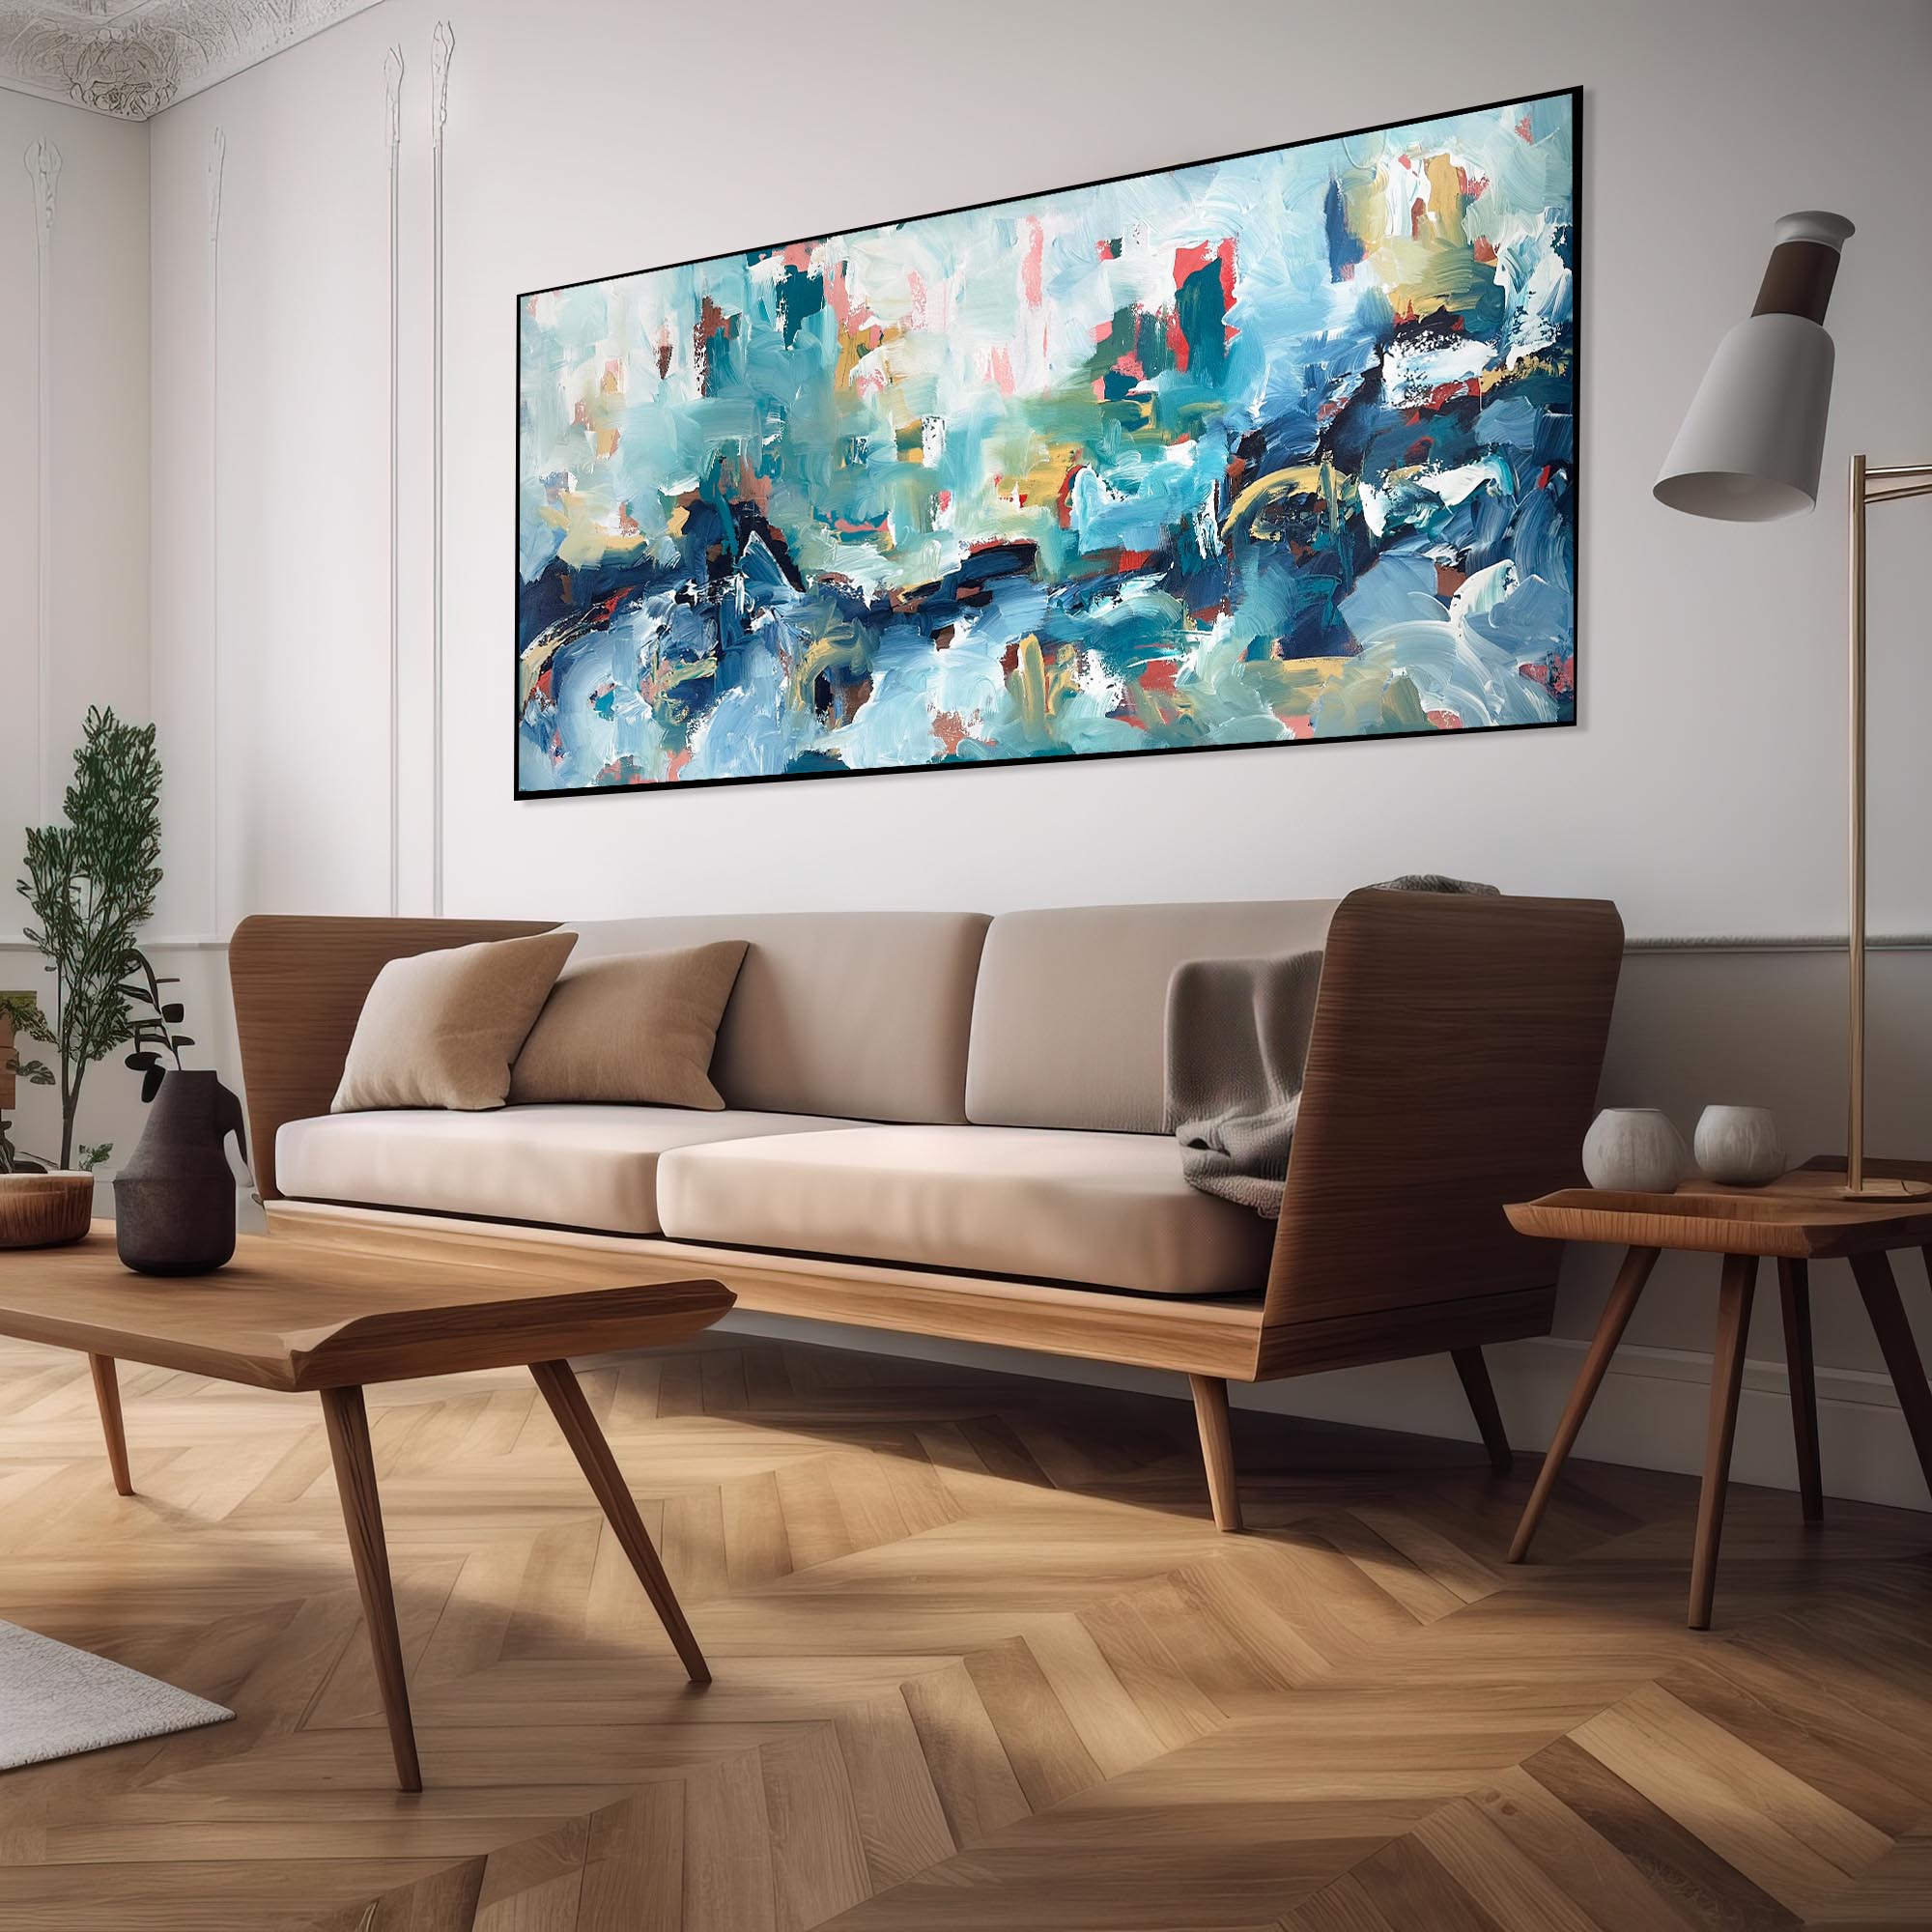 Large Abstract Painting Above Sofa In Living Room